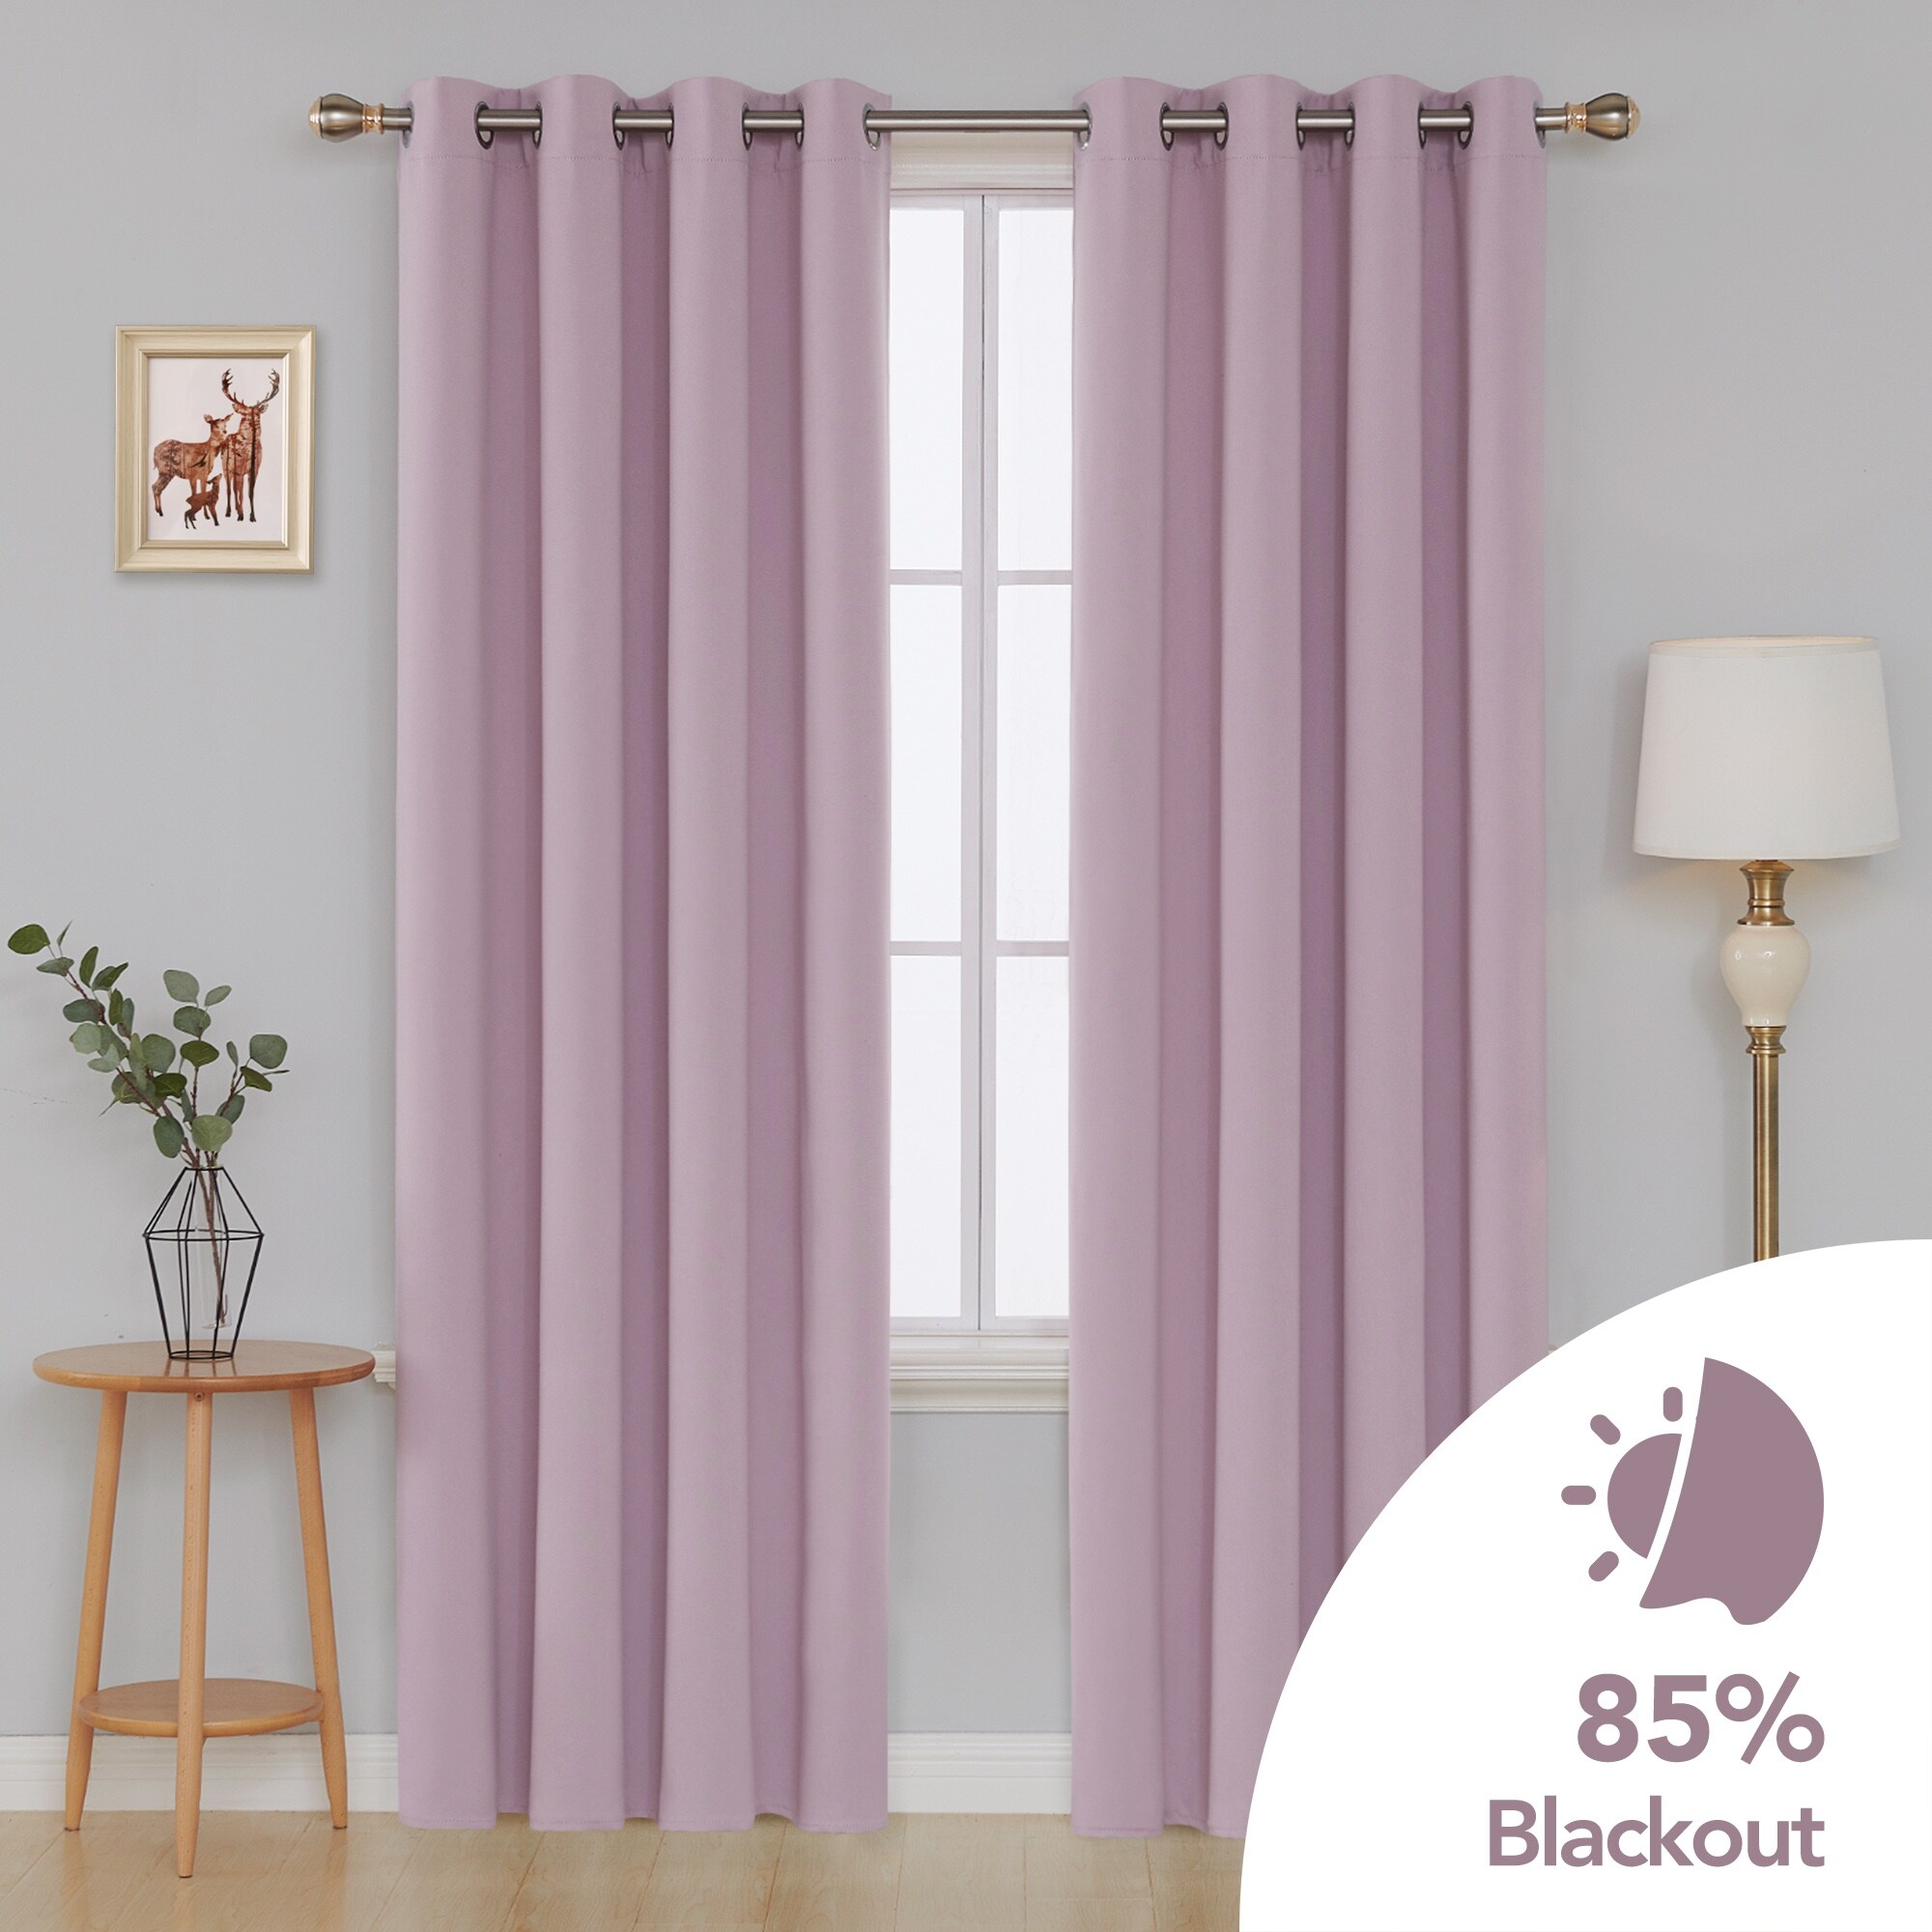 Deconovo Thermal Insulated Blackout Curtains 52x72 inch - Grommet